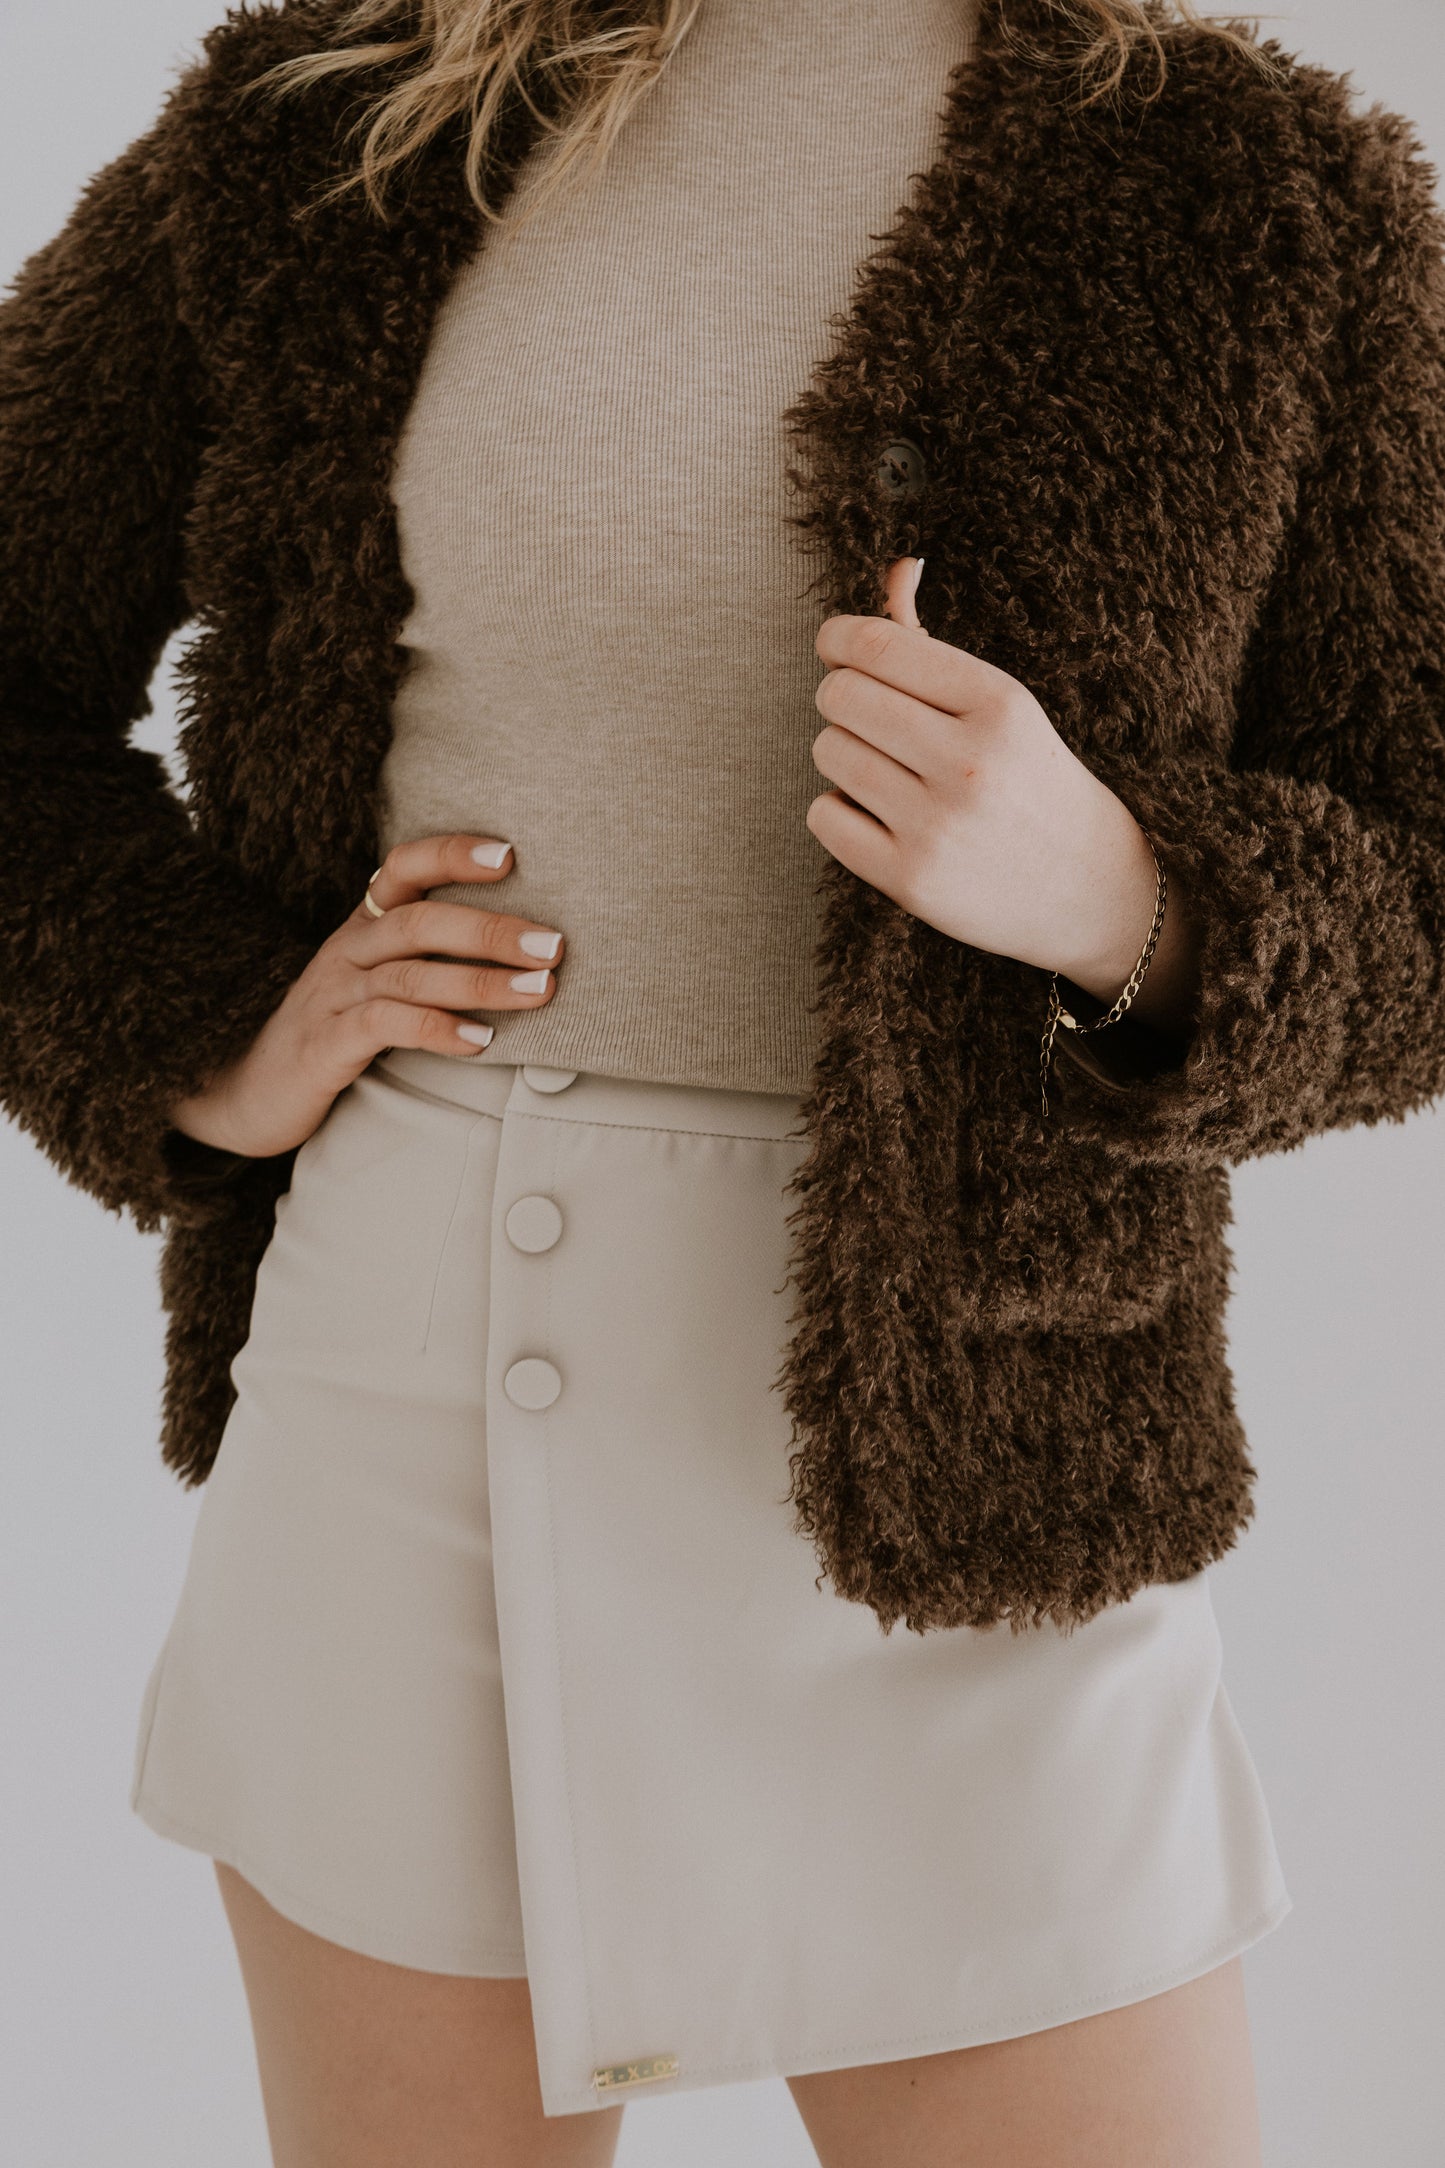 Fluffy Chocolate brown coat